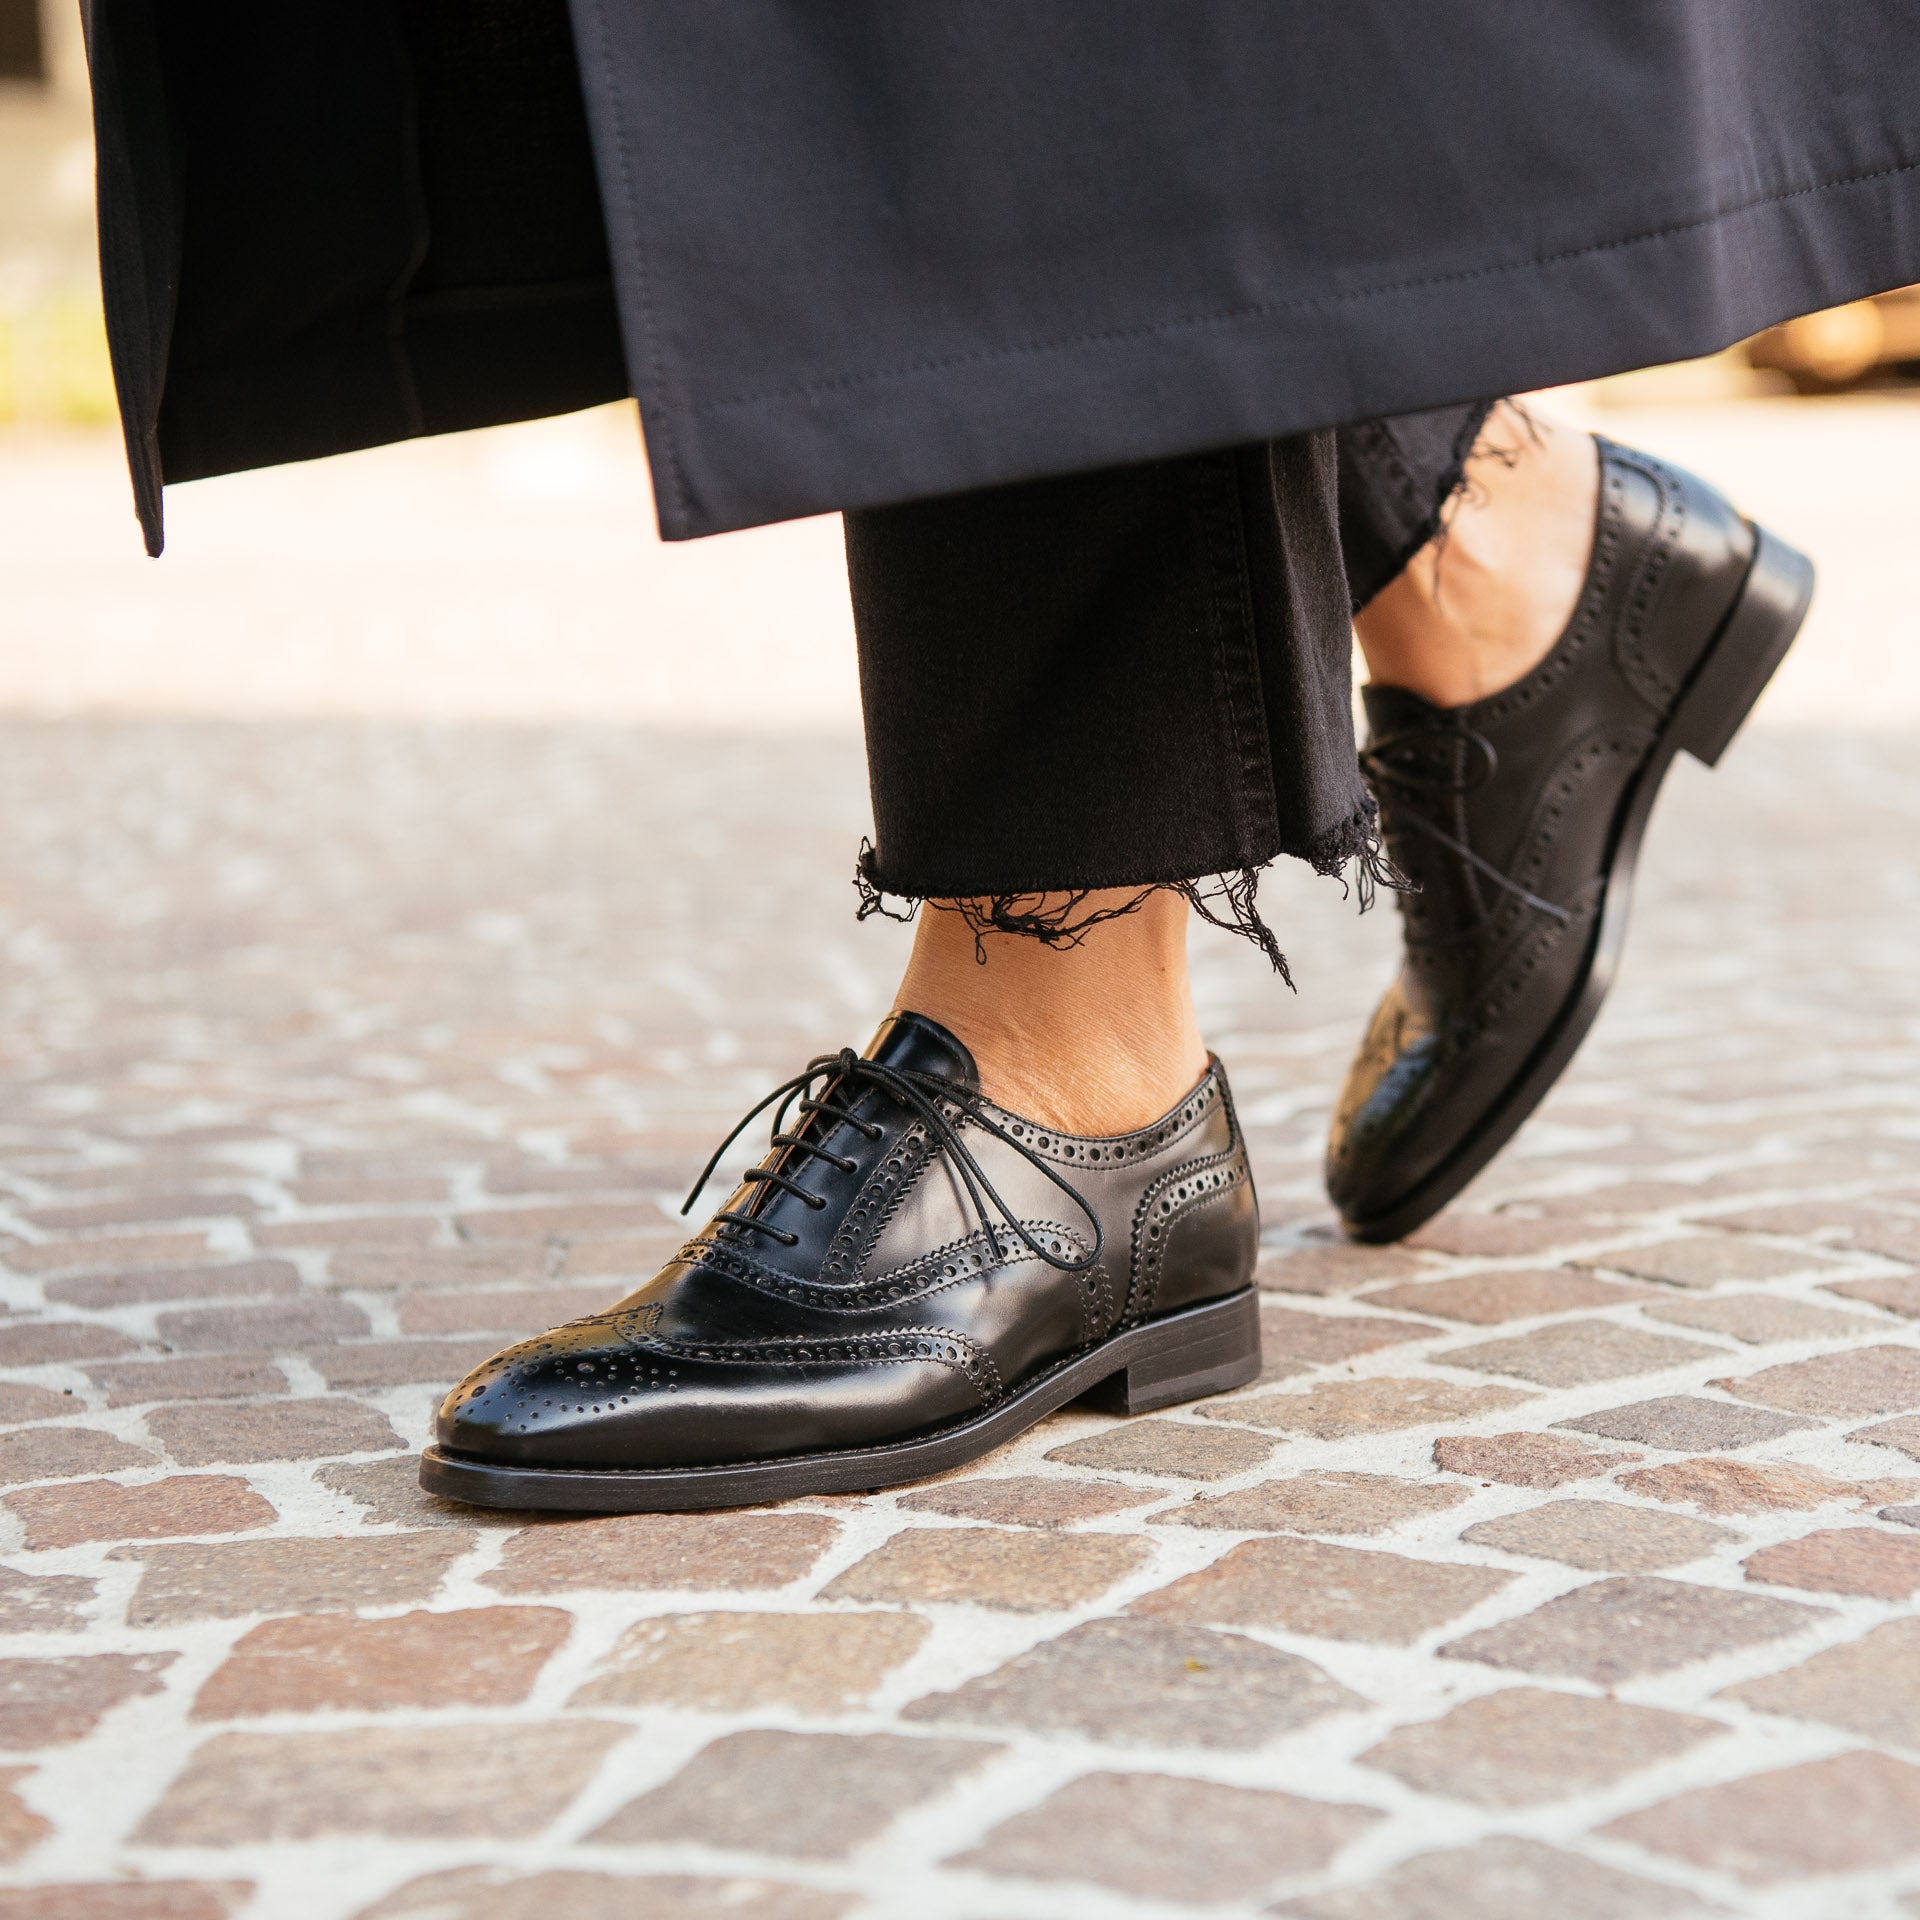 Velasca | Women's Oxfords shoes in leather